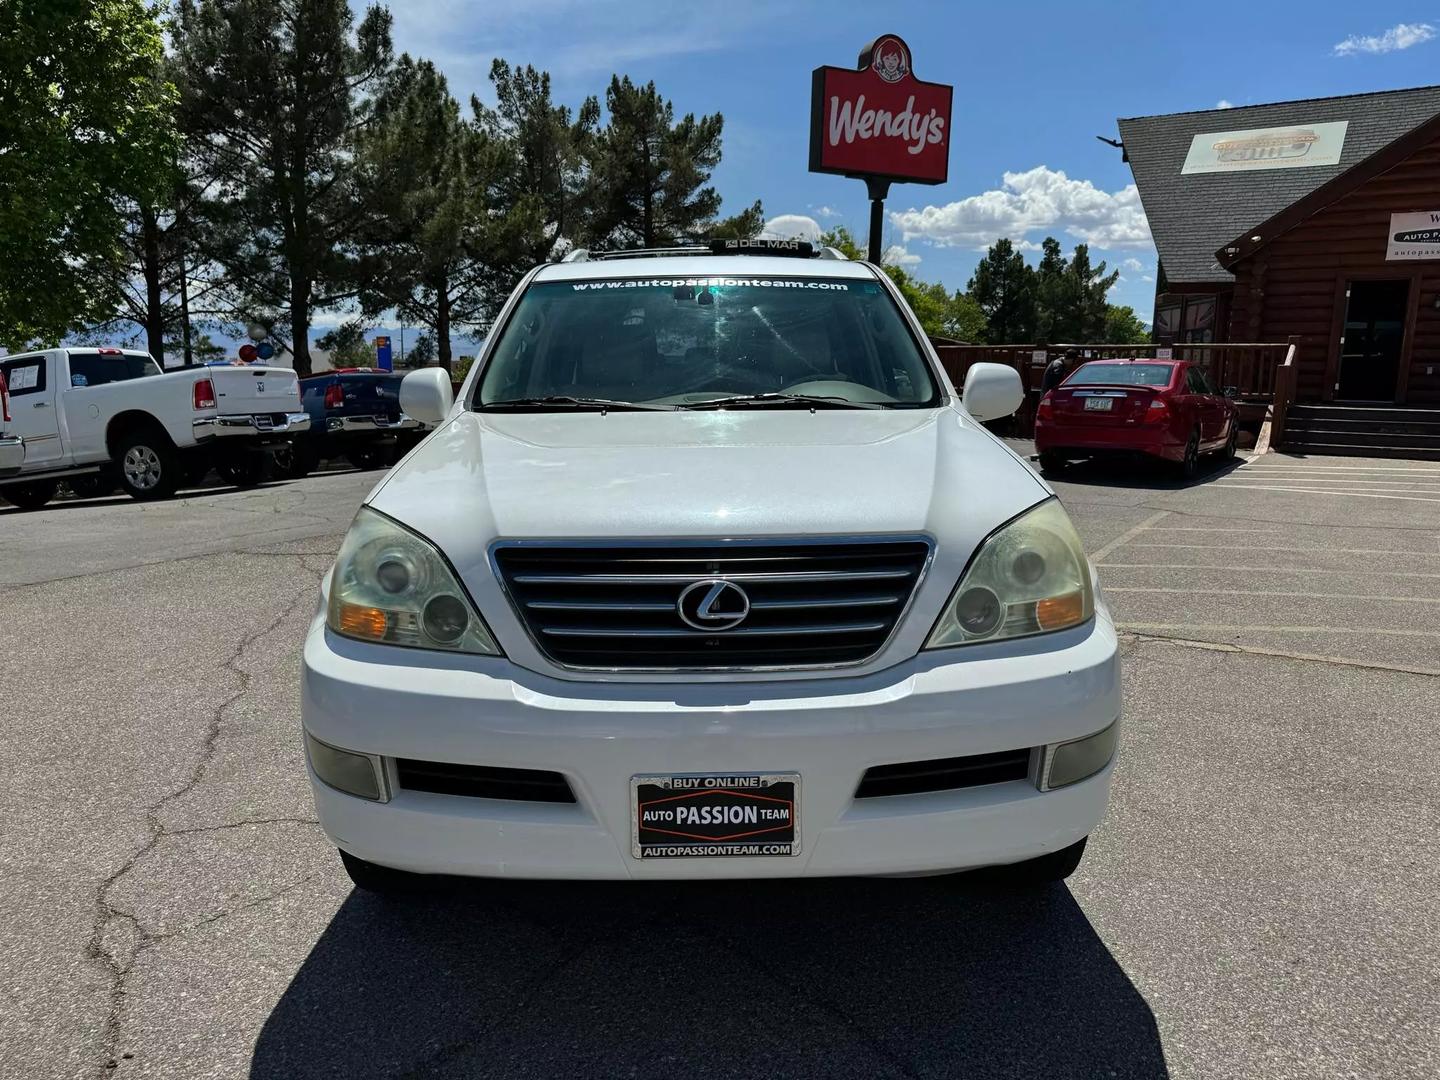 Used 2004 Lexus GX 470 with VIN JTJBT20X740043441 for sale in St. George, UT